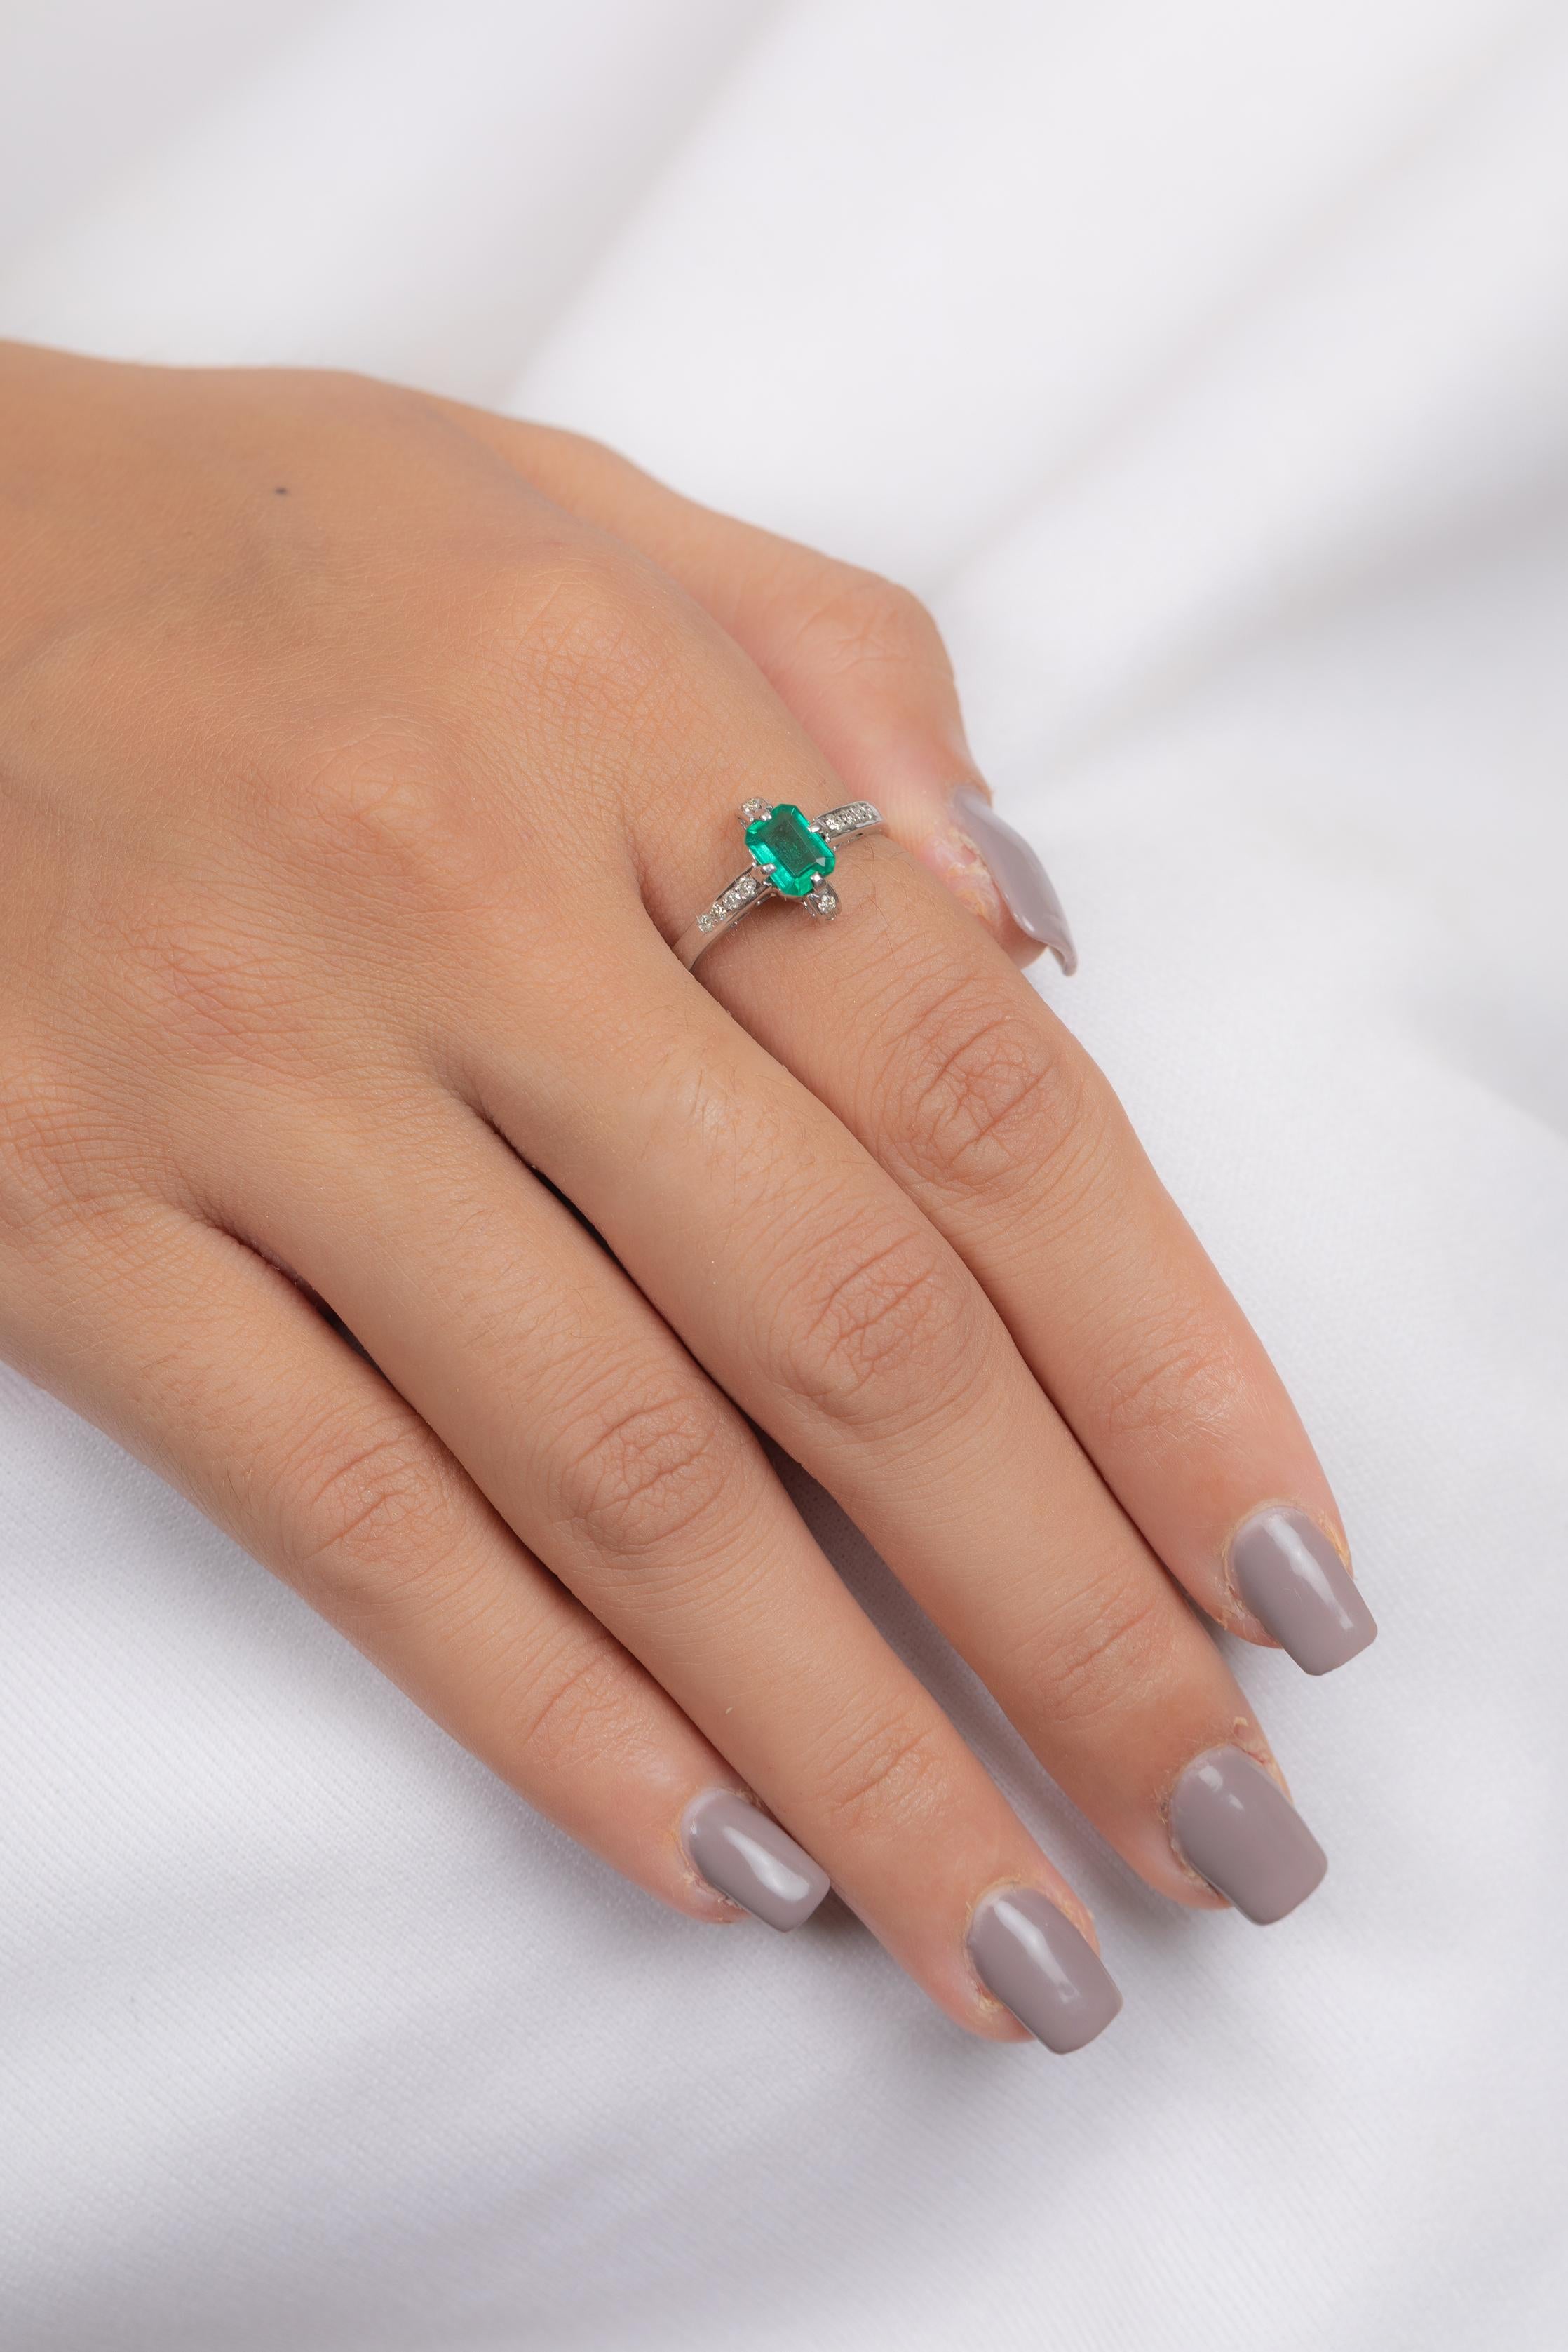 For Sale:  14K White Gold Emerald Ring with Diamonds  6